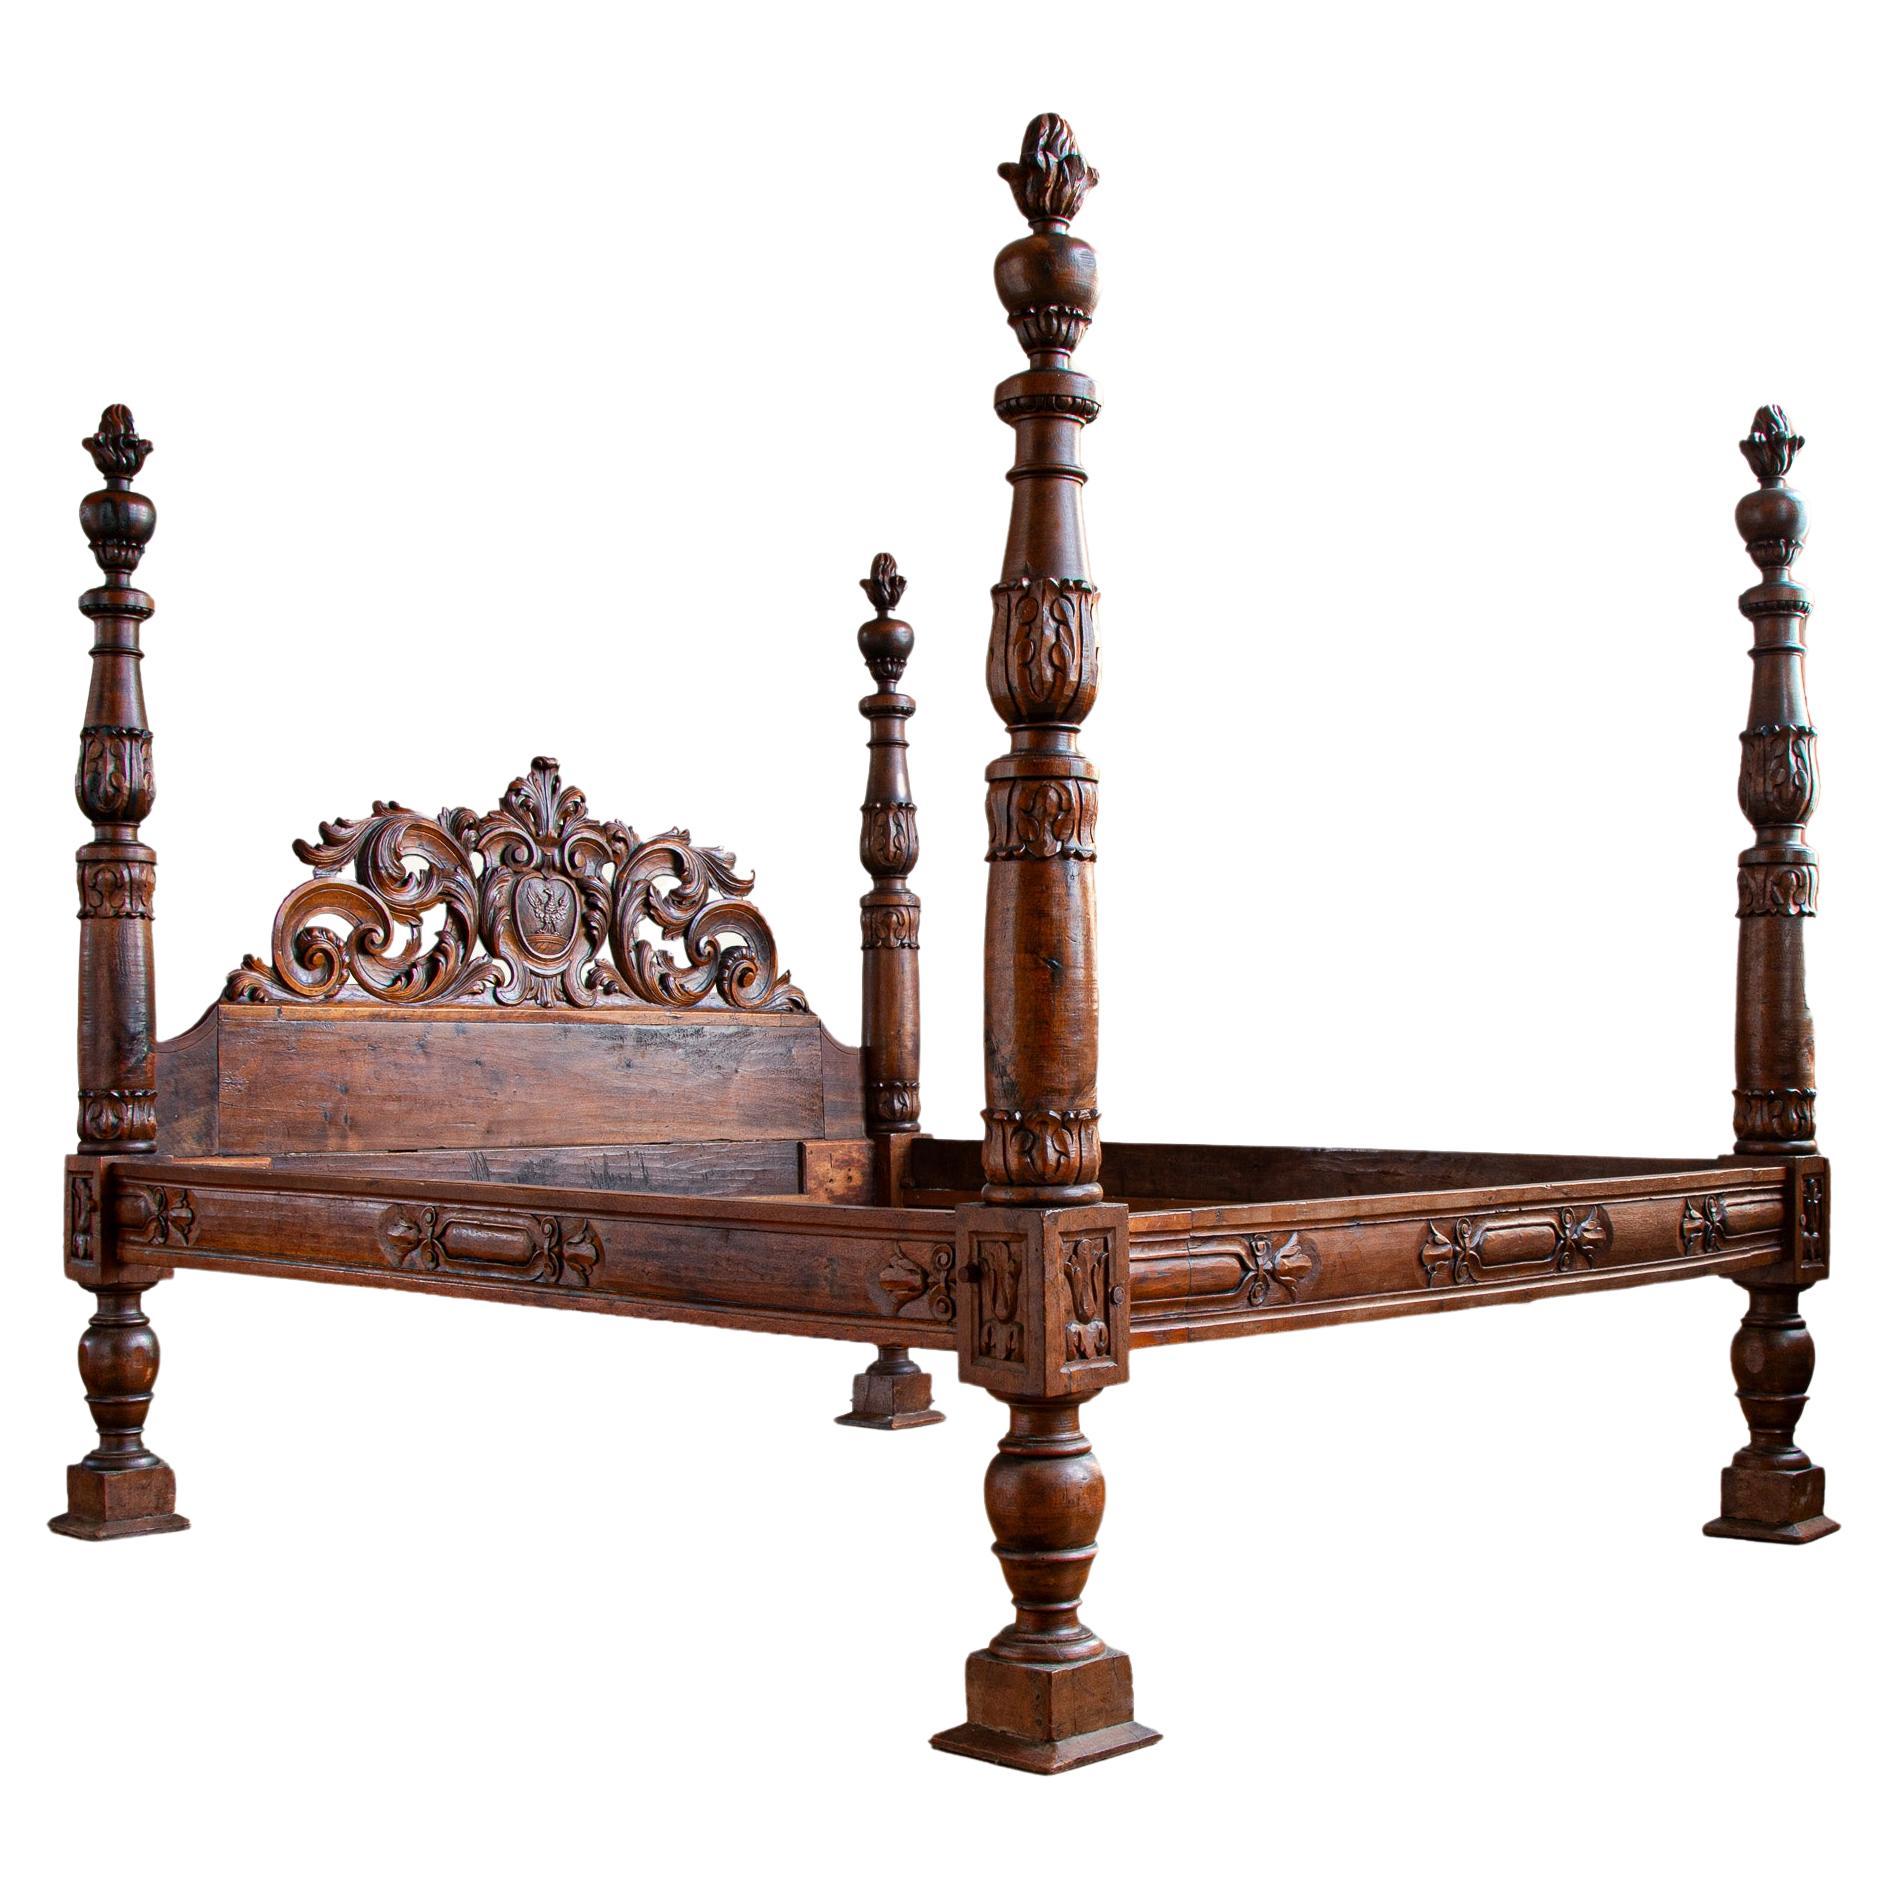 Circa Mid 1800's Italian Baroque Style Four Poster Bed In Carved Walnut